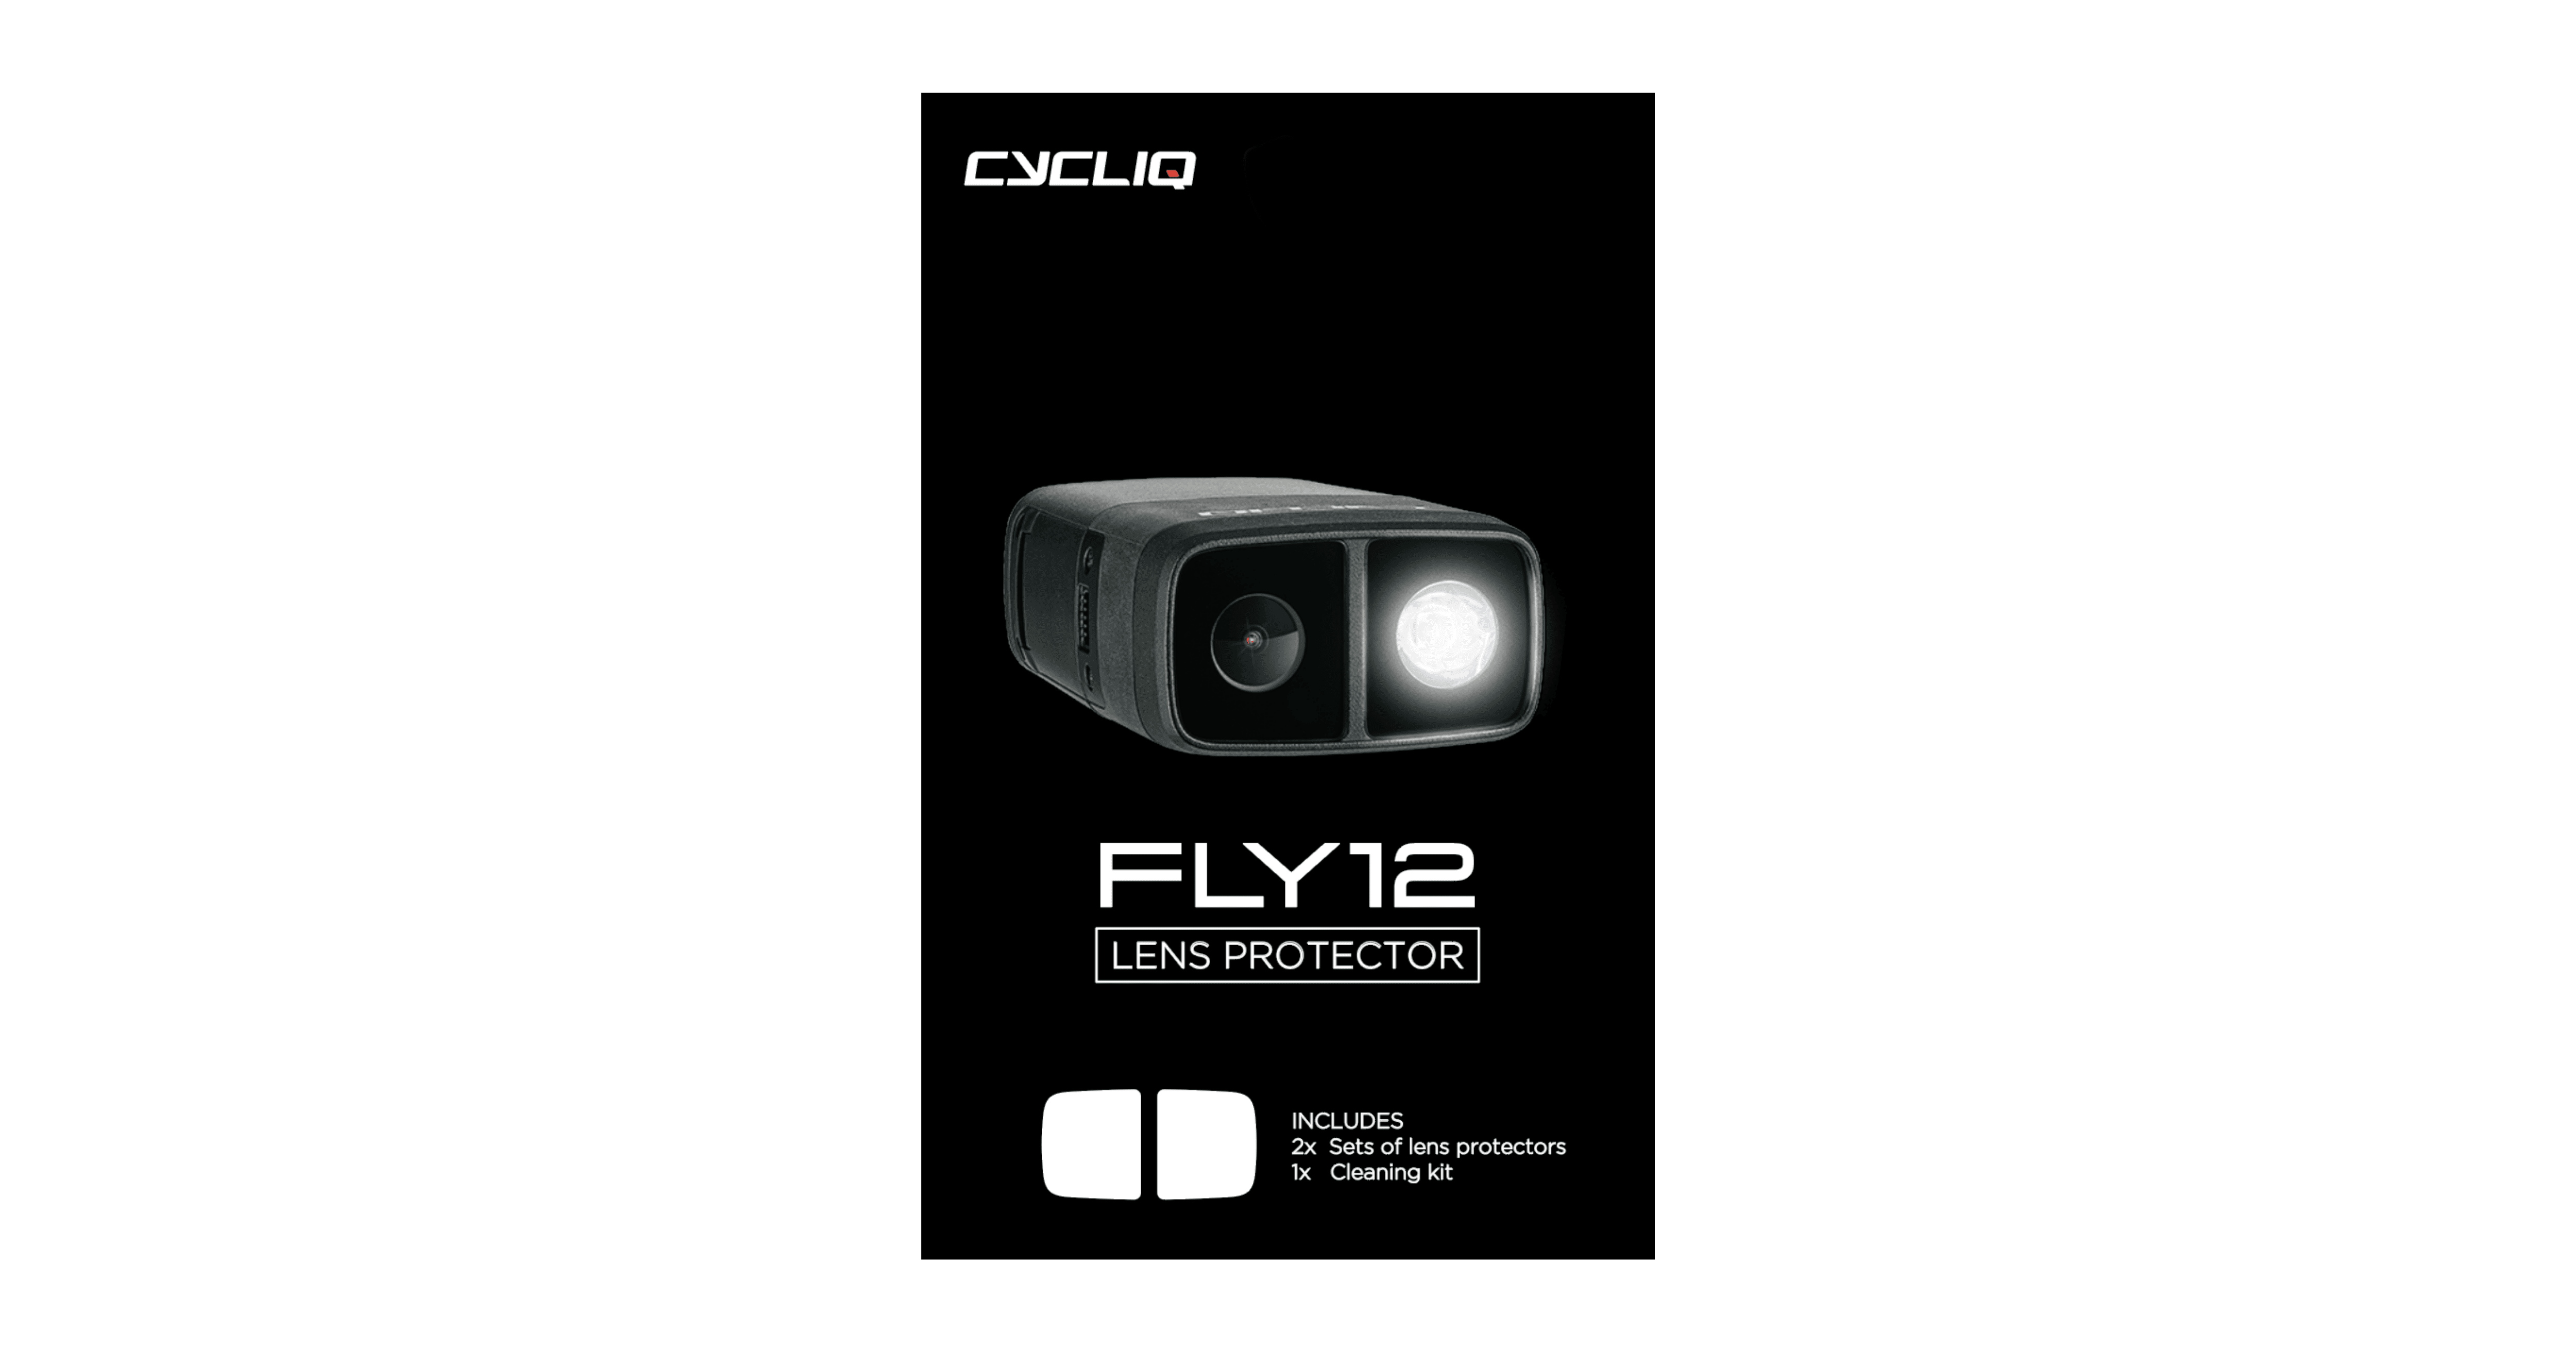 Fly12 Lens protector